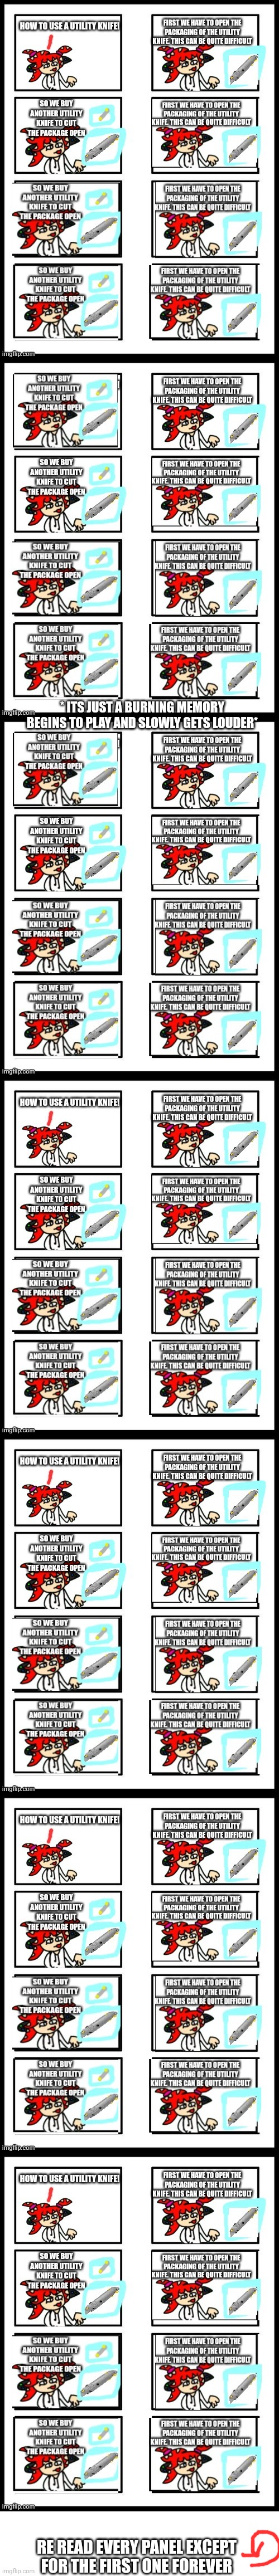 How to use a utility knife: by: splatza | * ITS JUST A BURNING MEMORY BEGINS TO PLAY AND SLOWLY GETS LOUDER*; RE READ EVERY PANEL EXCEPT FOR THE FIRST ONE FOREVER | image tagged in blank white template | made w/ Imgflip meme maker